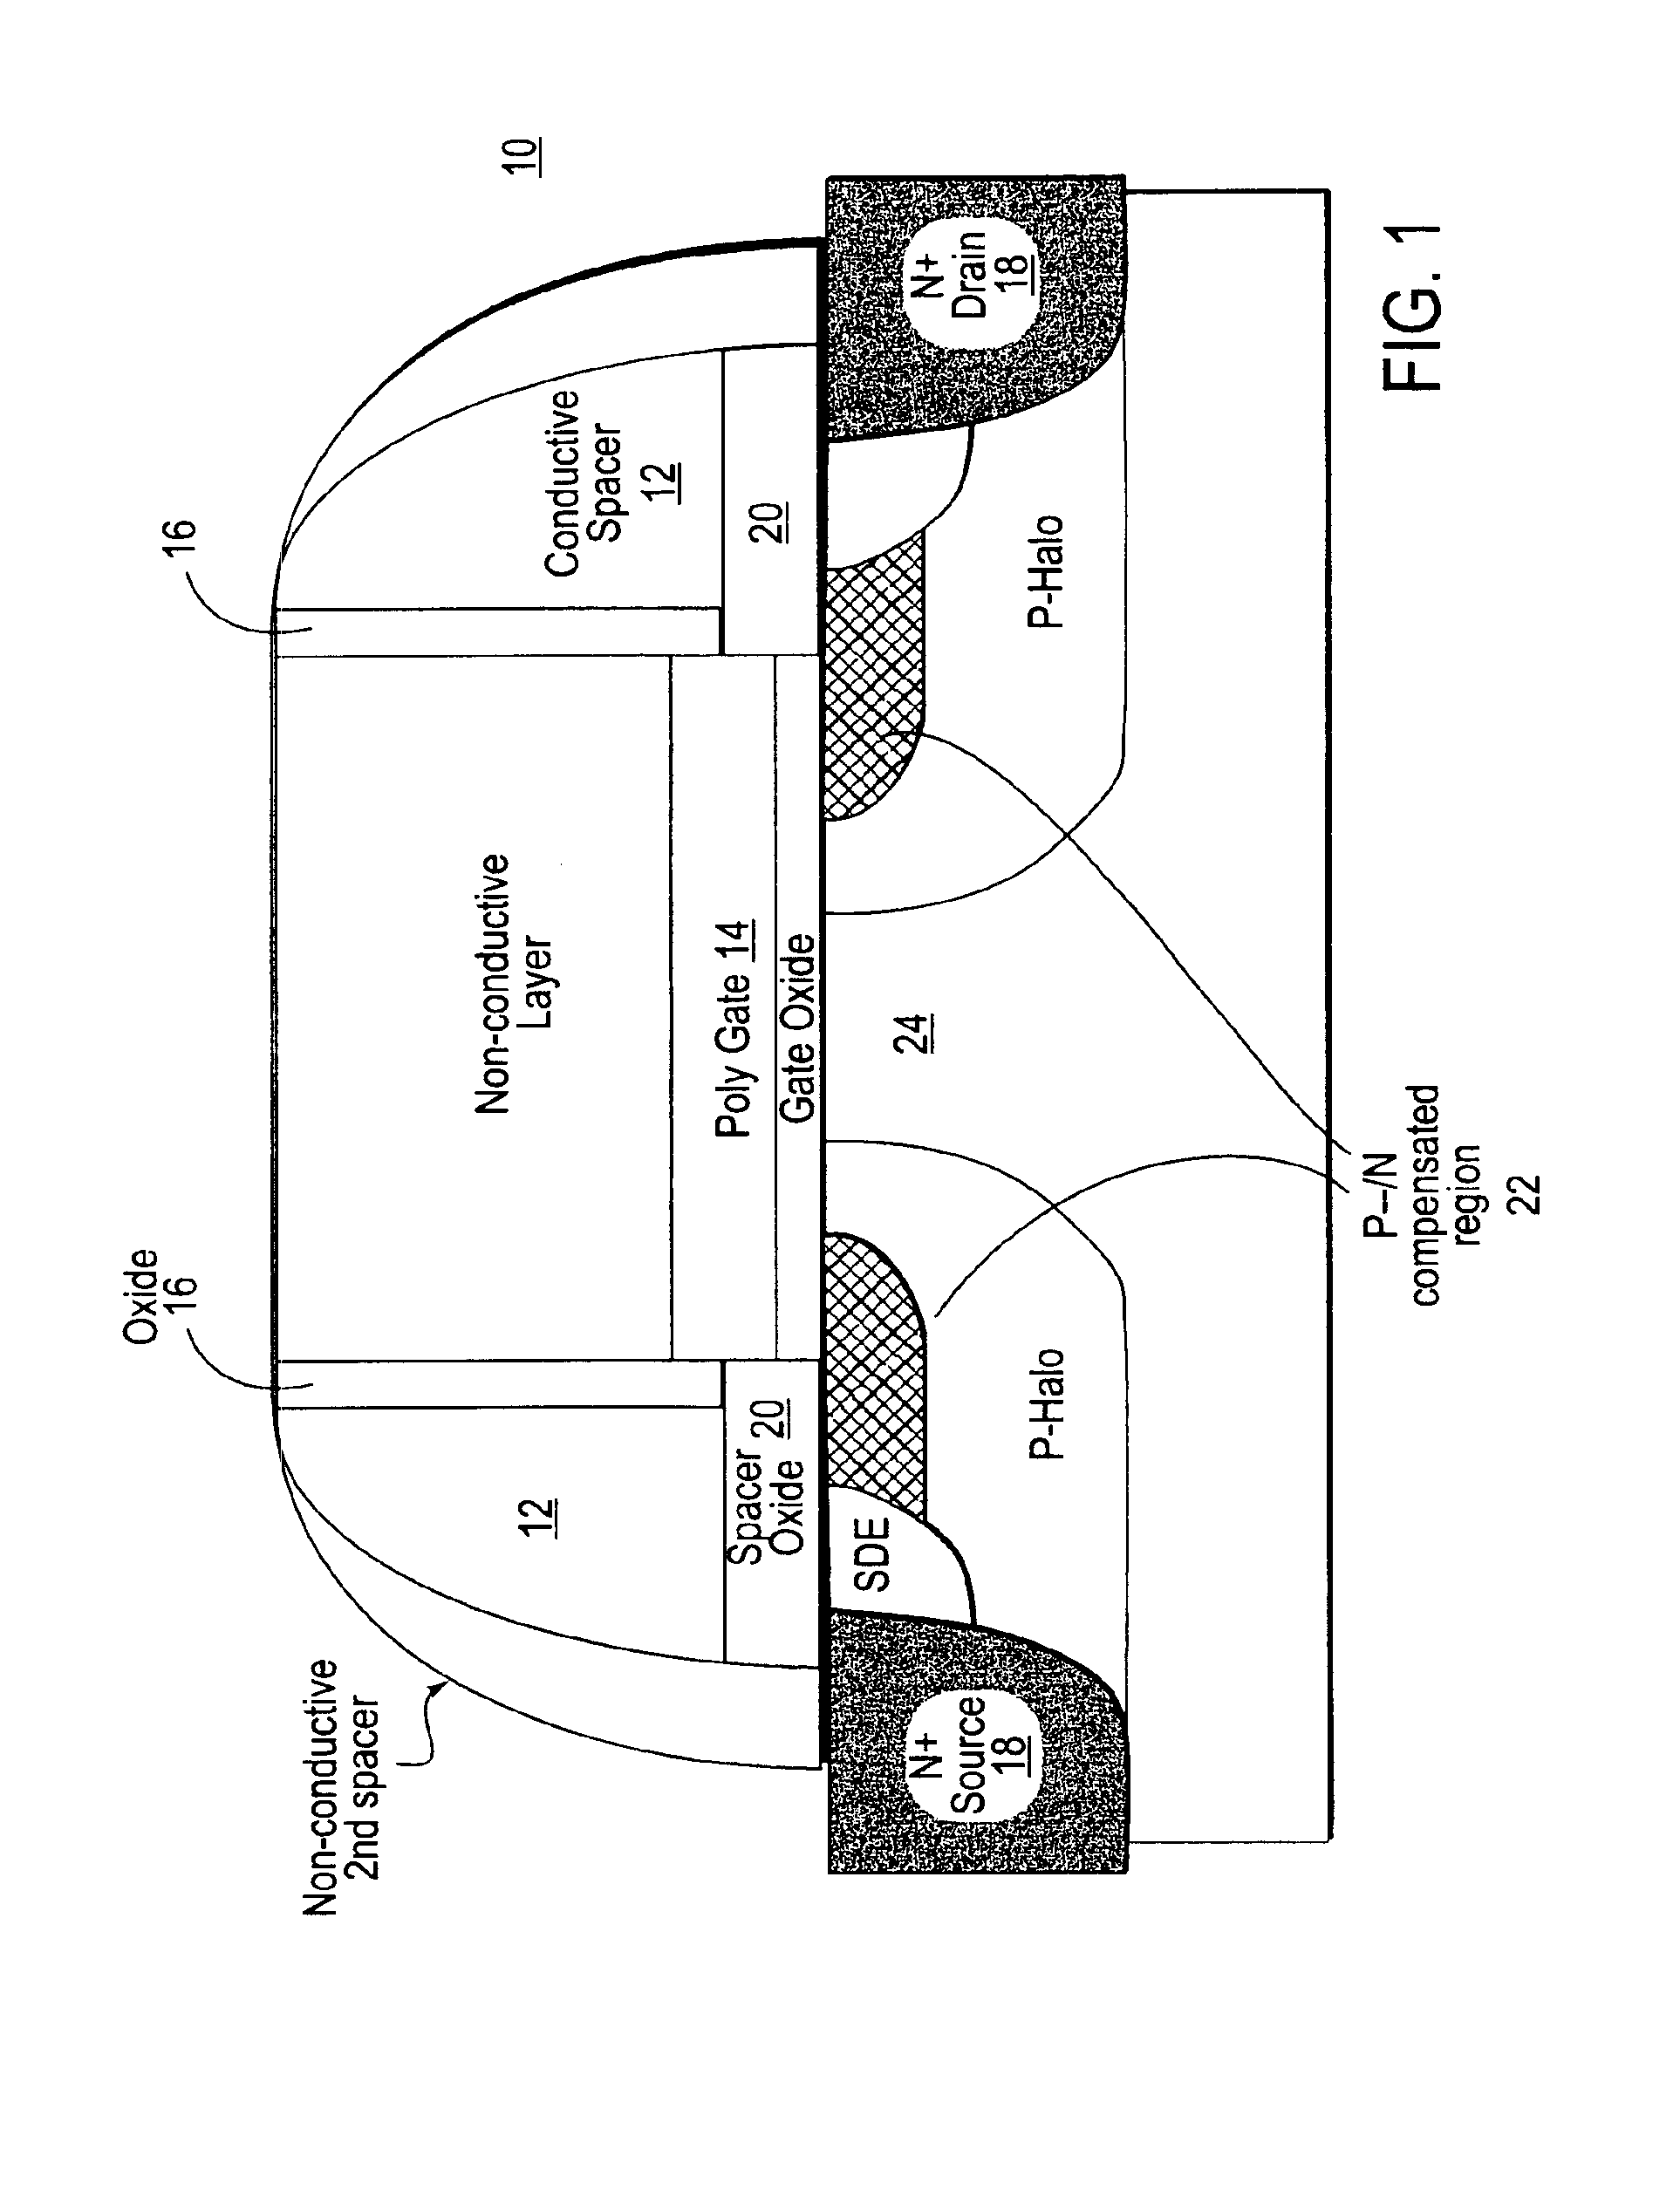 Transistor with workfunction-induced charge layer